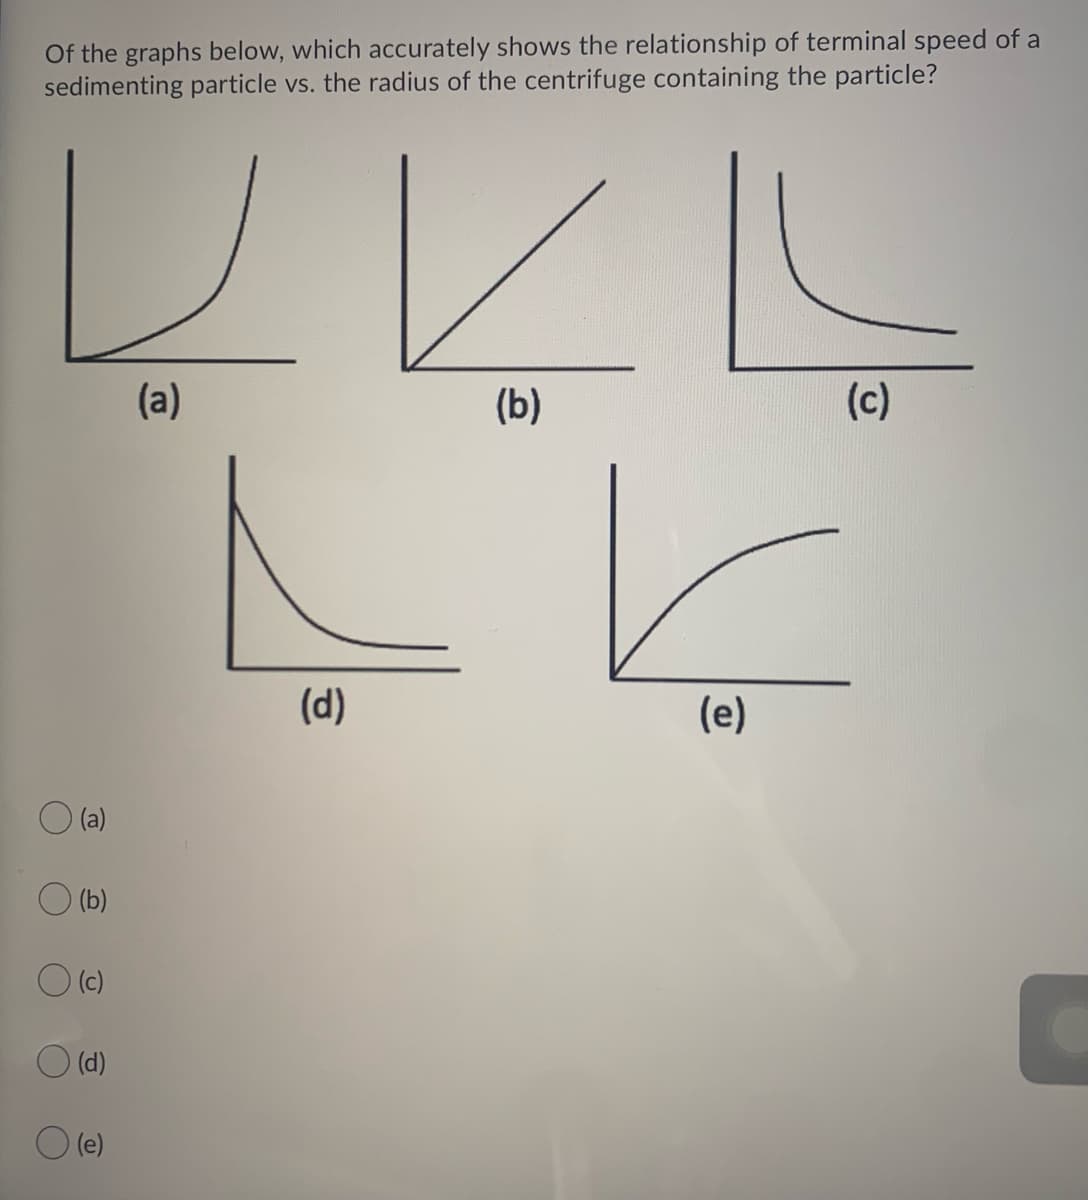 Of the graphs below, which accurately shows the relationship of terminal speed of a
sedimenting particle vs. the radius of the centrifuge containing the particle?
(a)
(b)
(c)
(d)
(e)
(a)
(b)
O c)
(d)
O (e)
